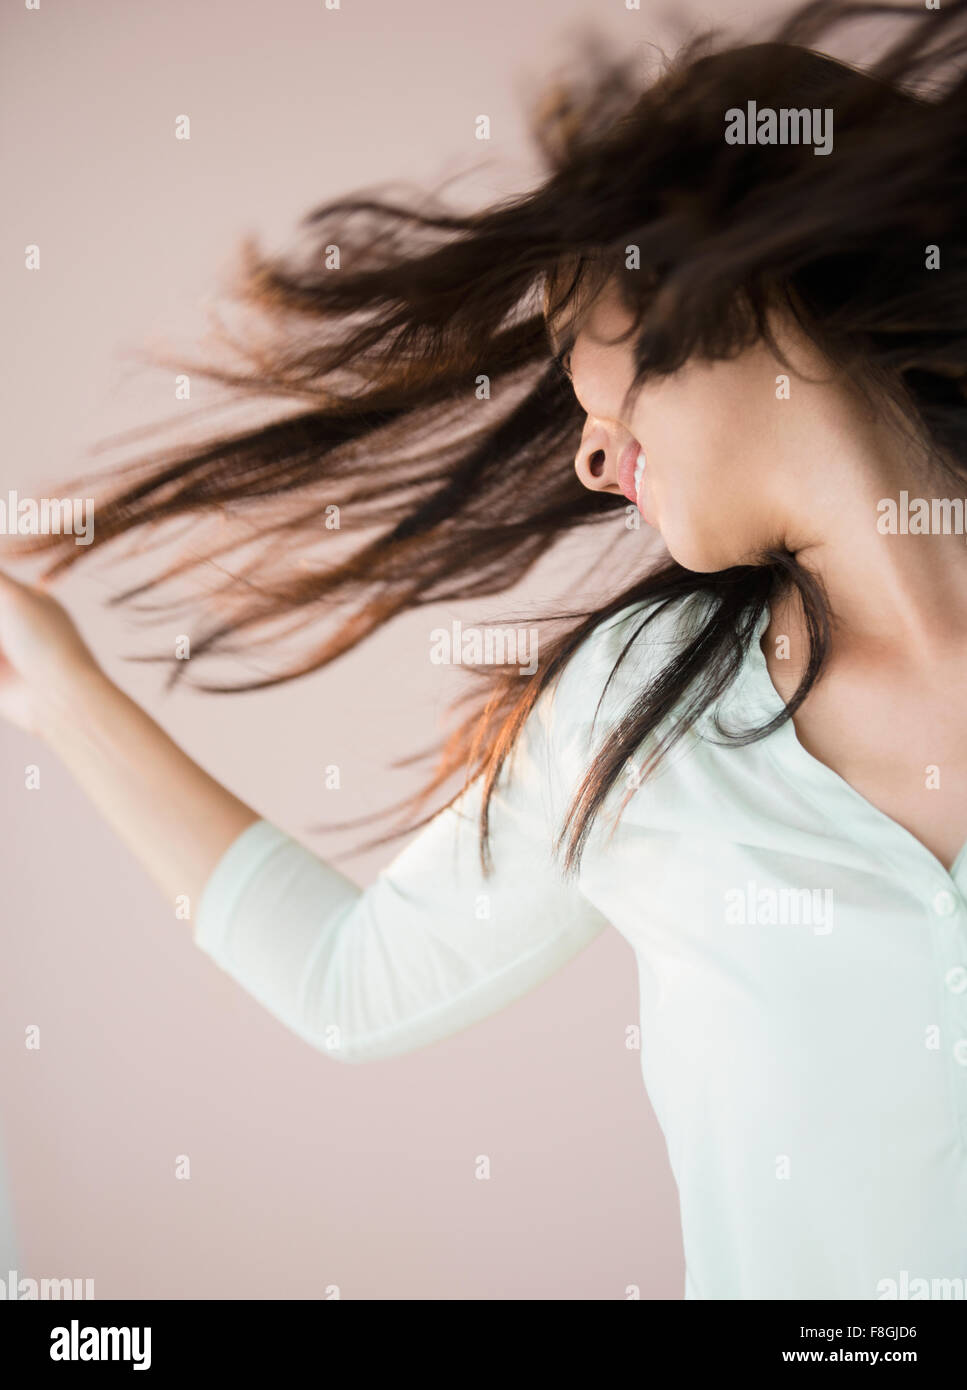 Chinese woman tossing her hair Stock Photo